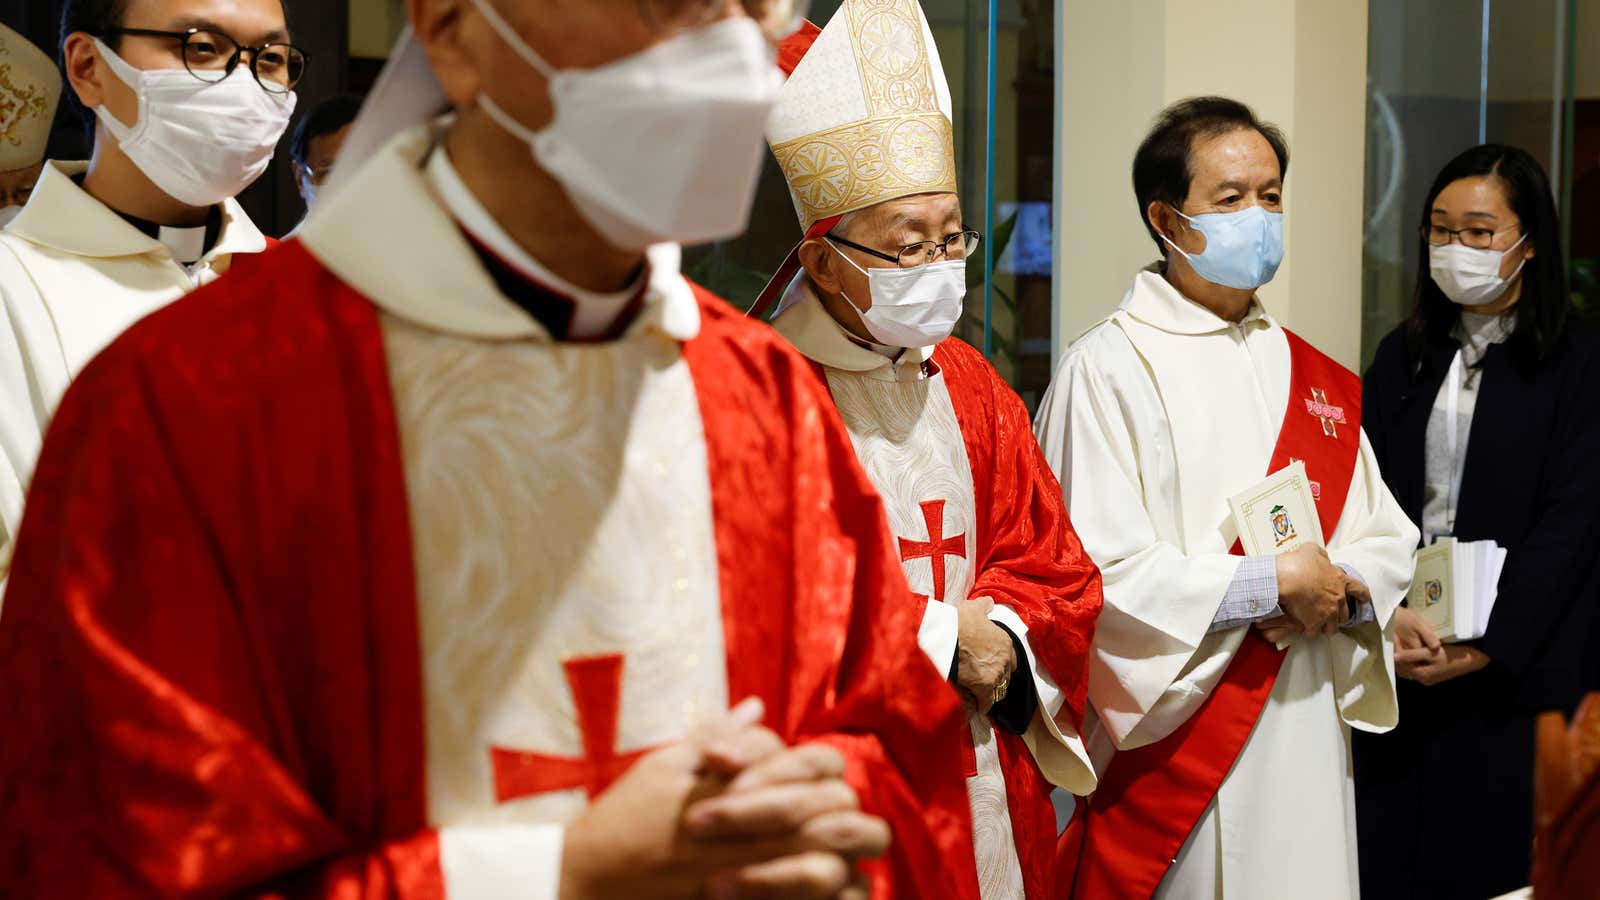 Retired bishop Cardinal Joseph Zen was among the activists arrested in Hong Kong.